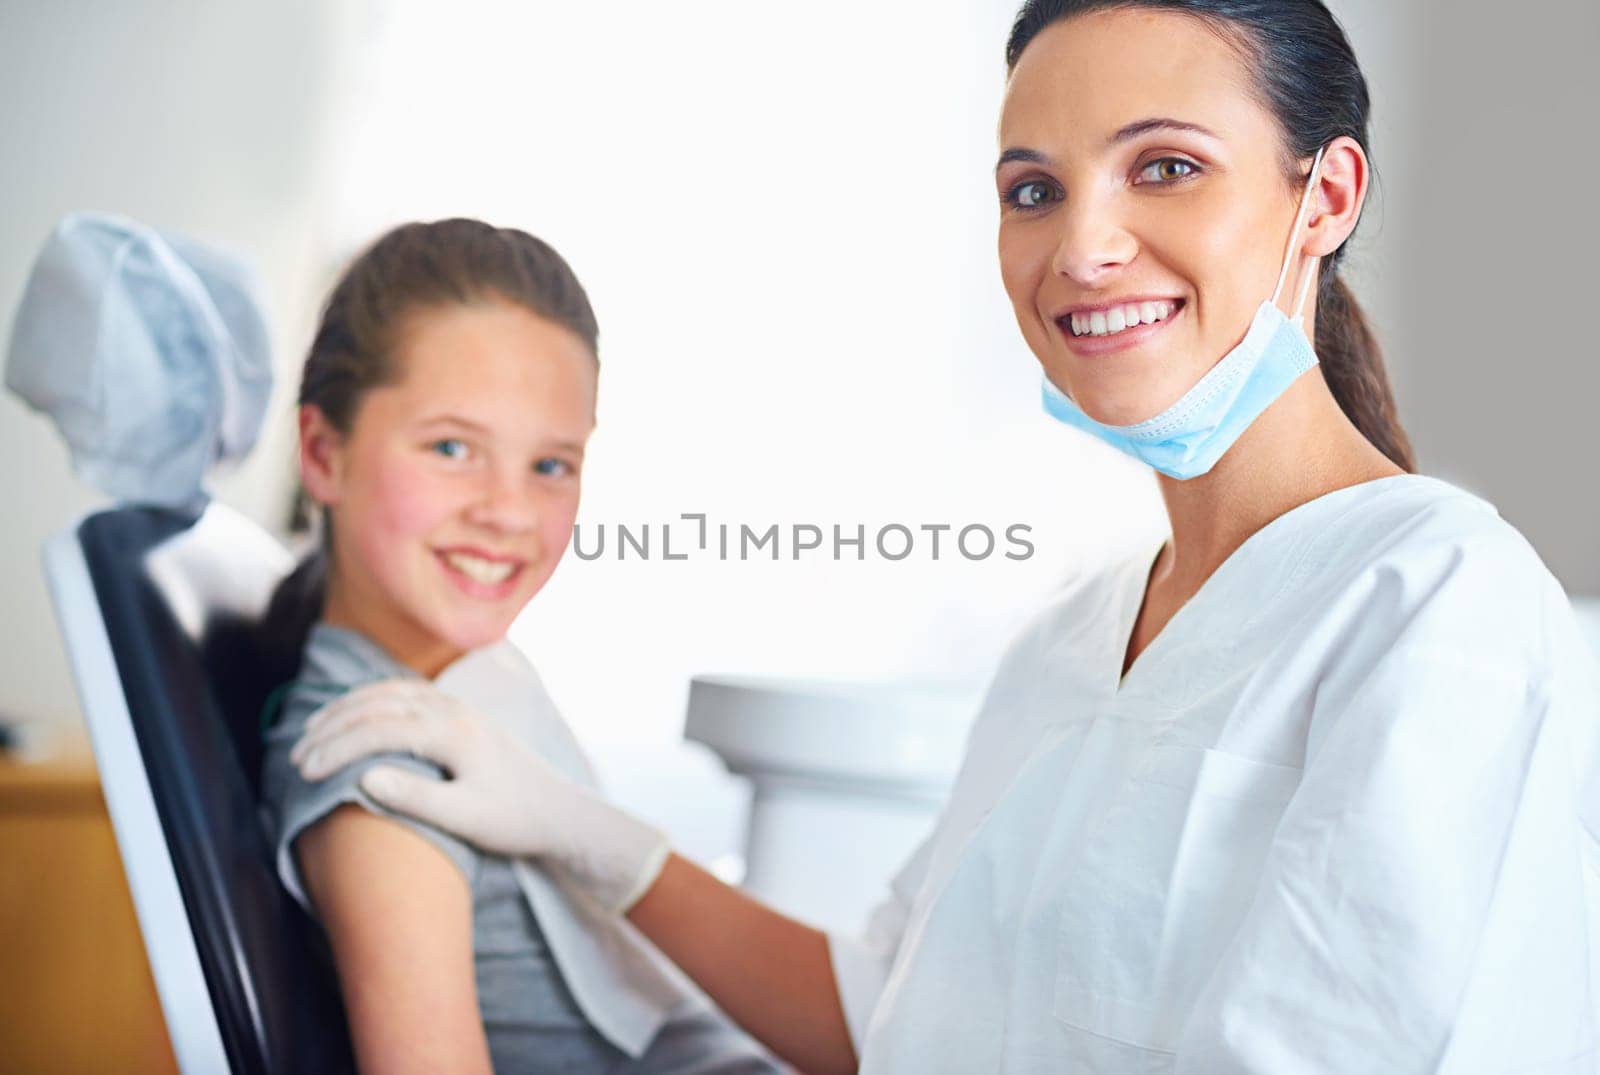 Shes my best little brusher. Portrait of a female dentist and child in a dentist office